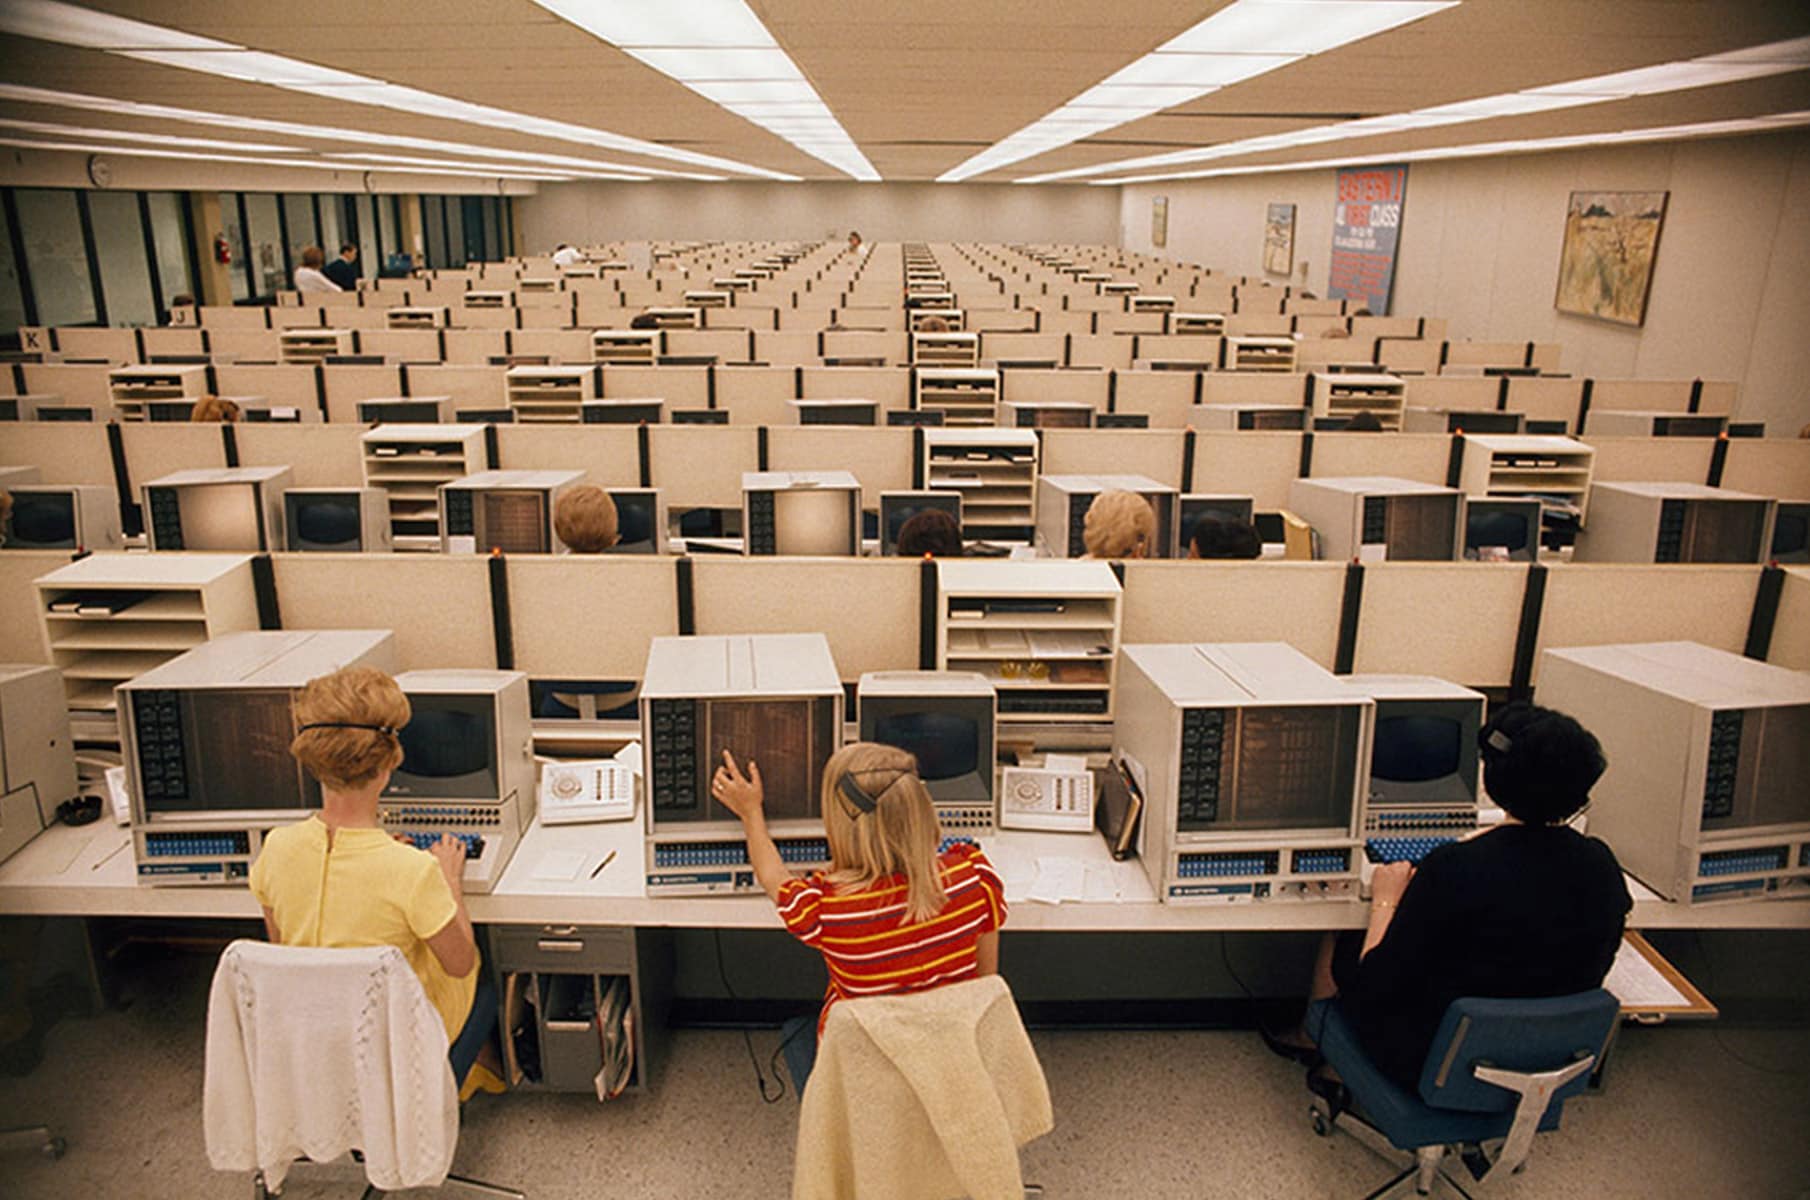 Eastern Airlines reservation center, Miami, 1970. © National Geographic.